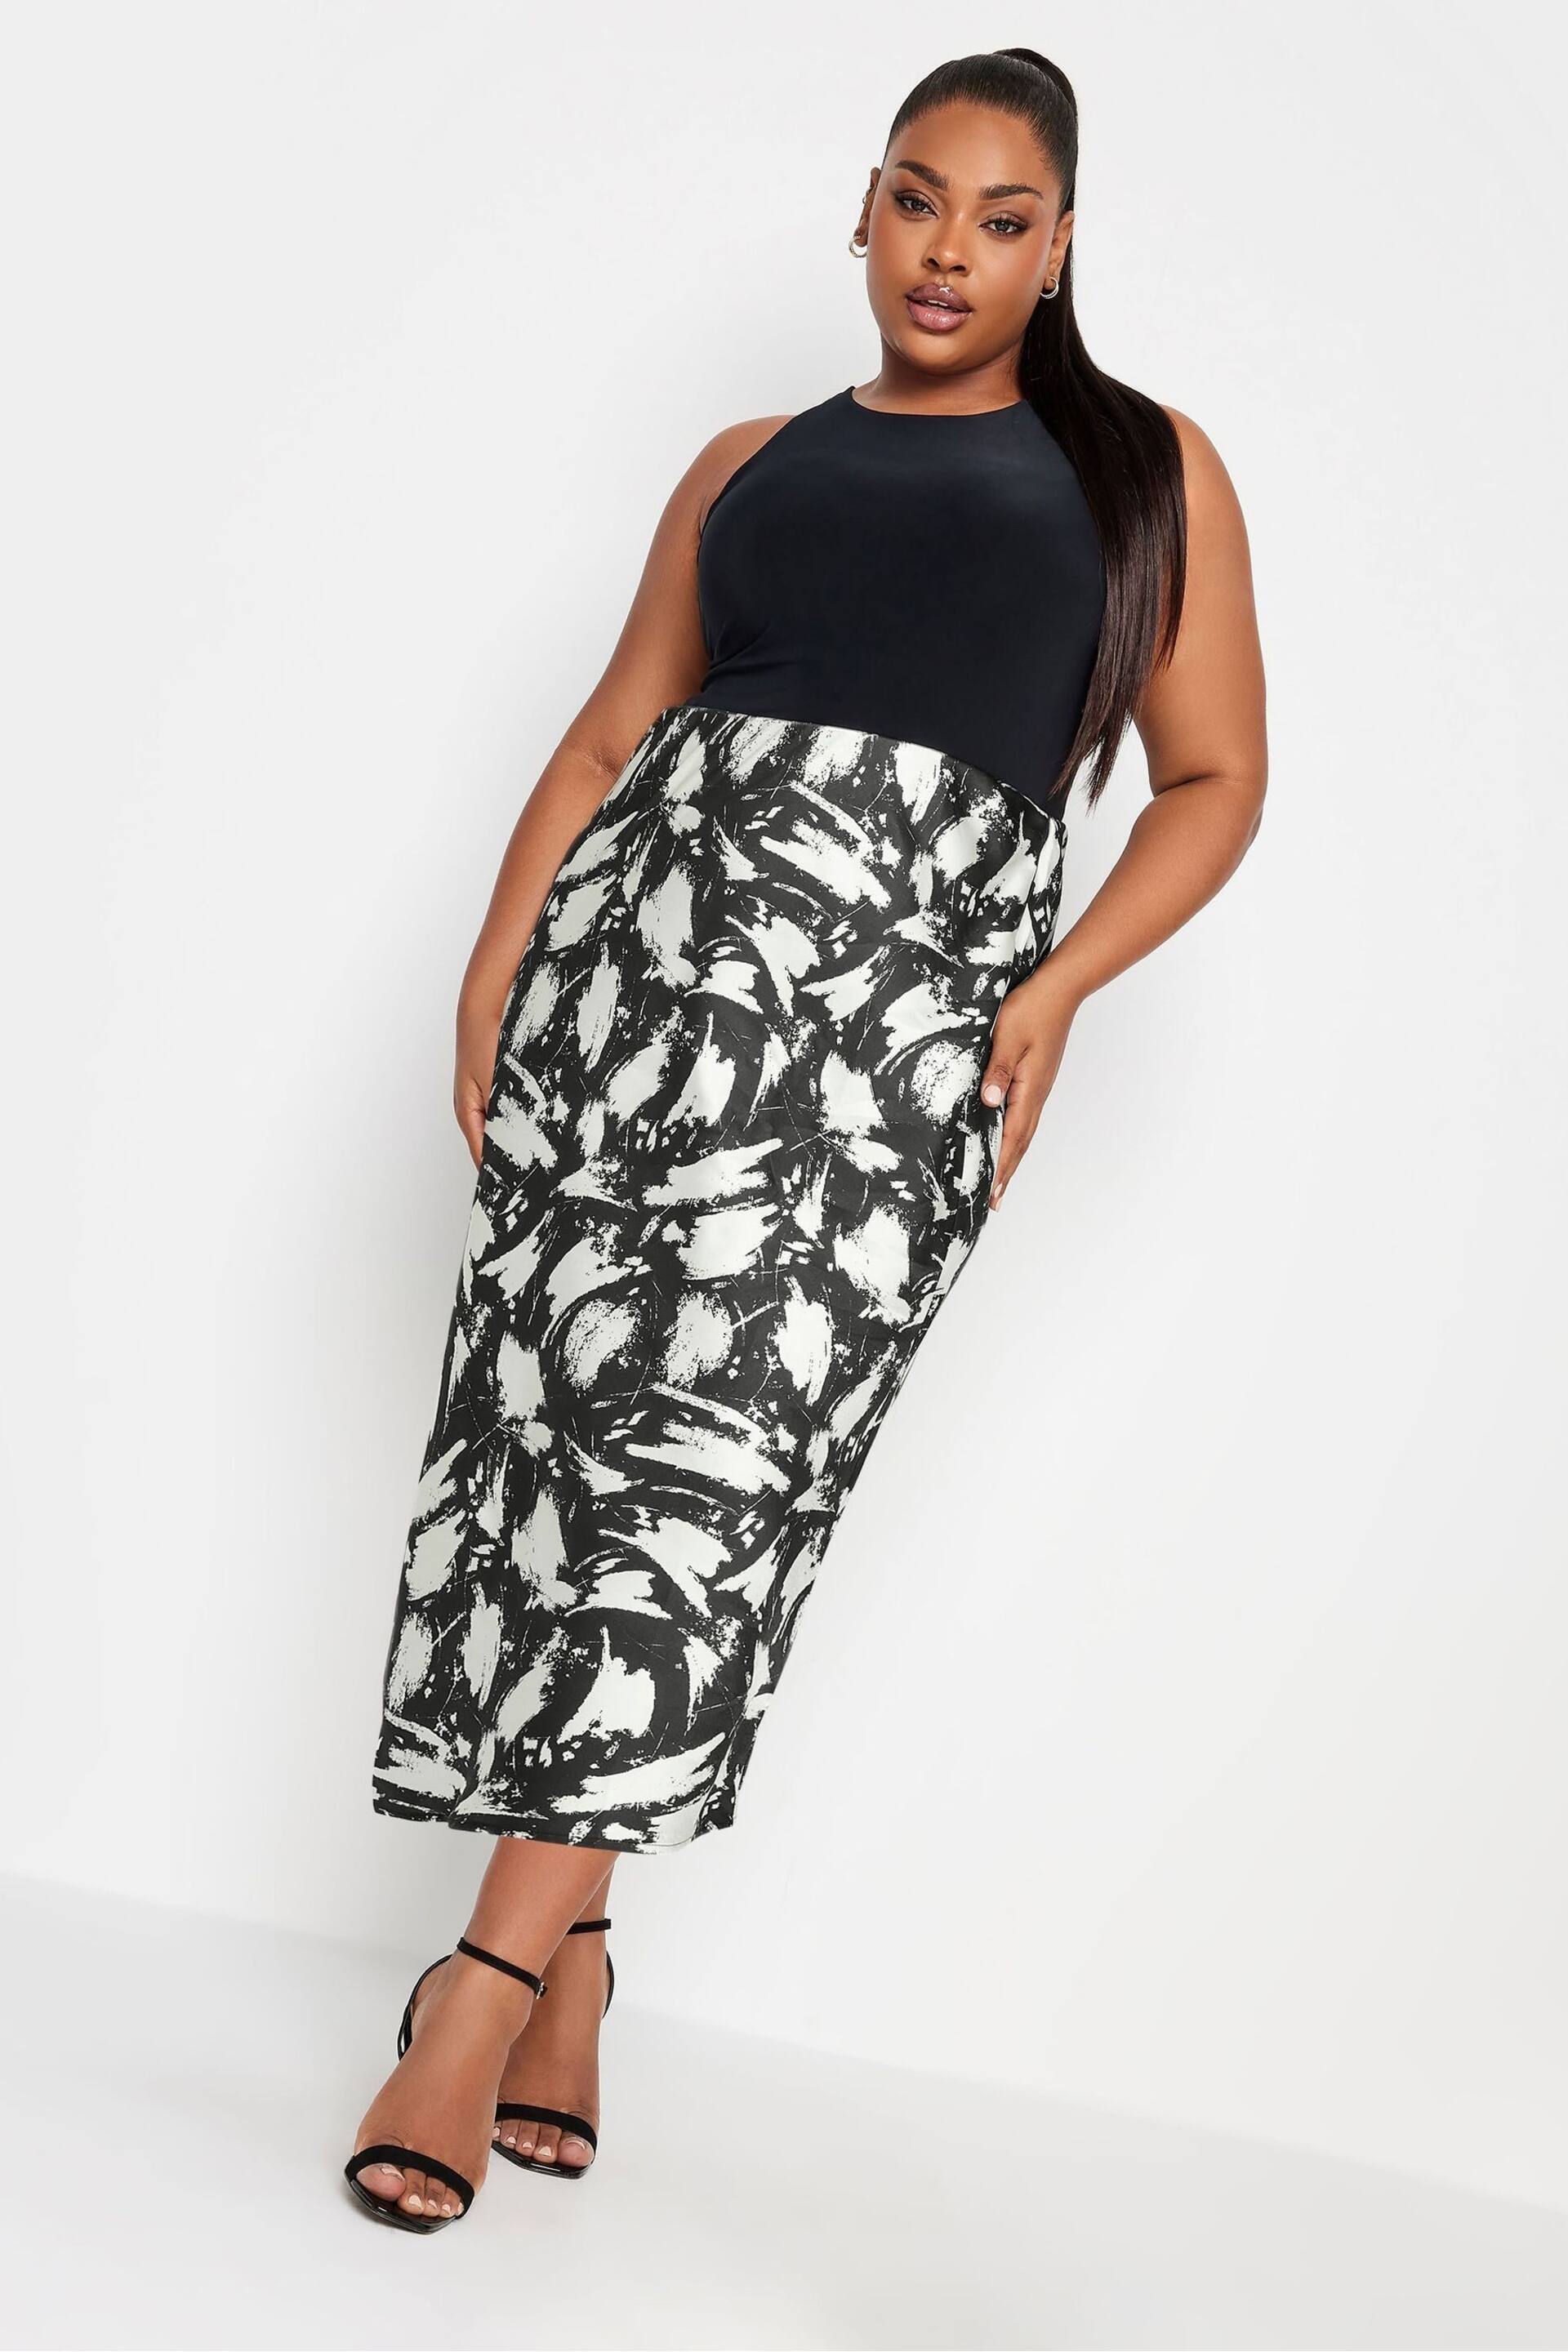 Yours Curve Black Bias Cut Skirt - Image 4 of 4